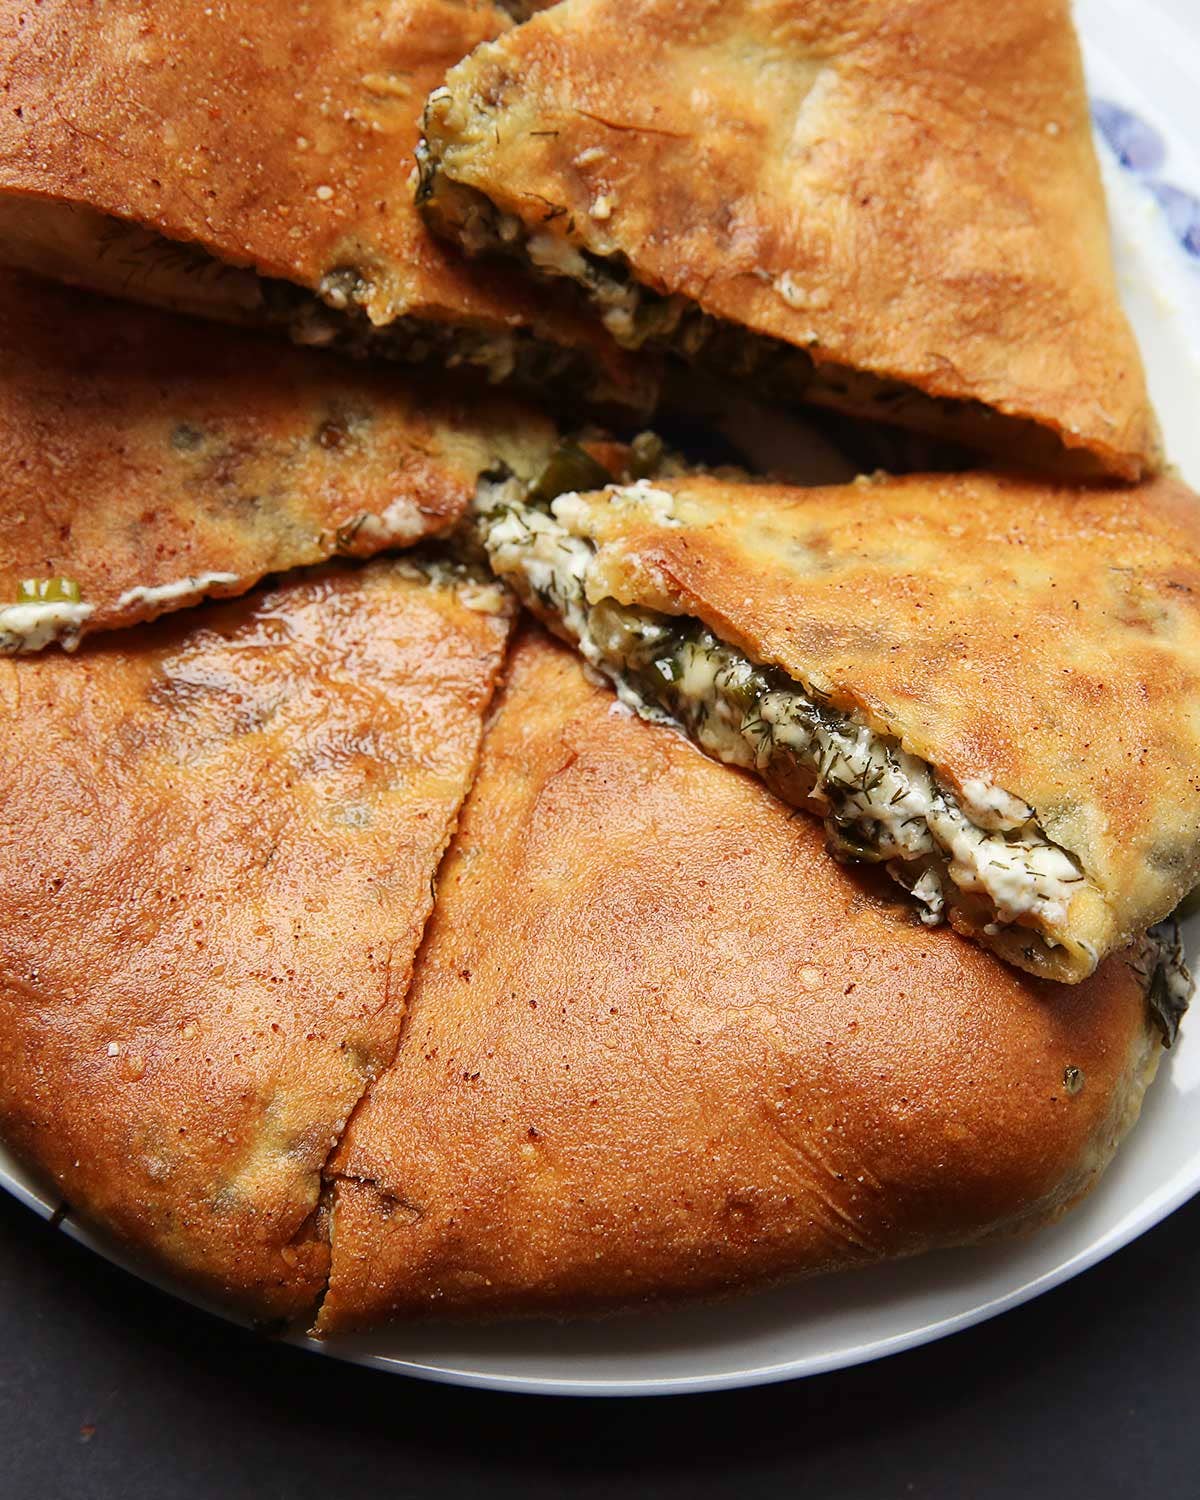 These Super-Stuffed Ossetian Pies are the Perfect Winter Meal